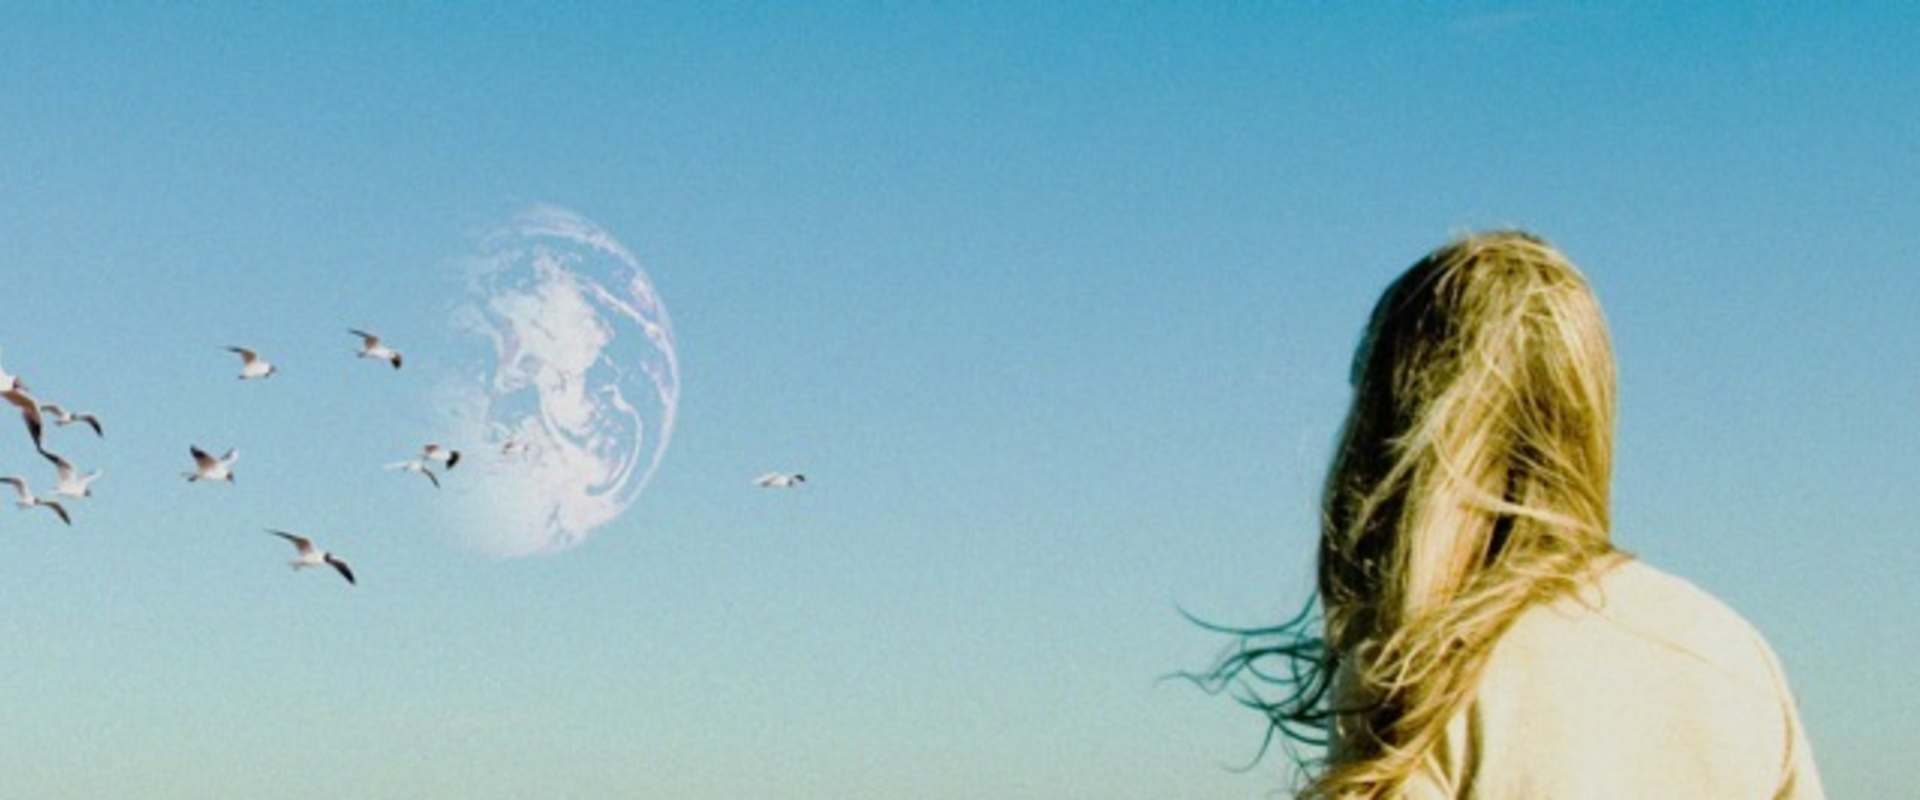 Another Earth background 2